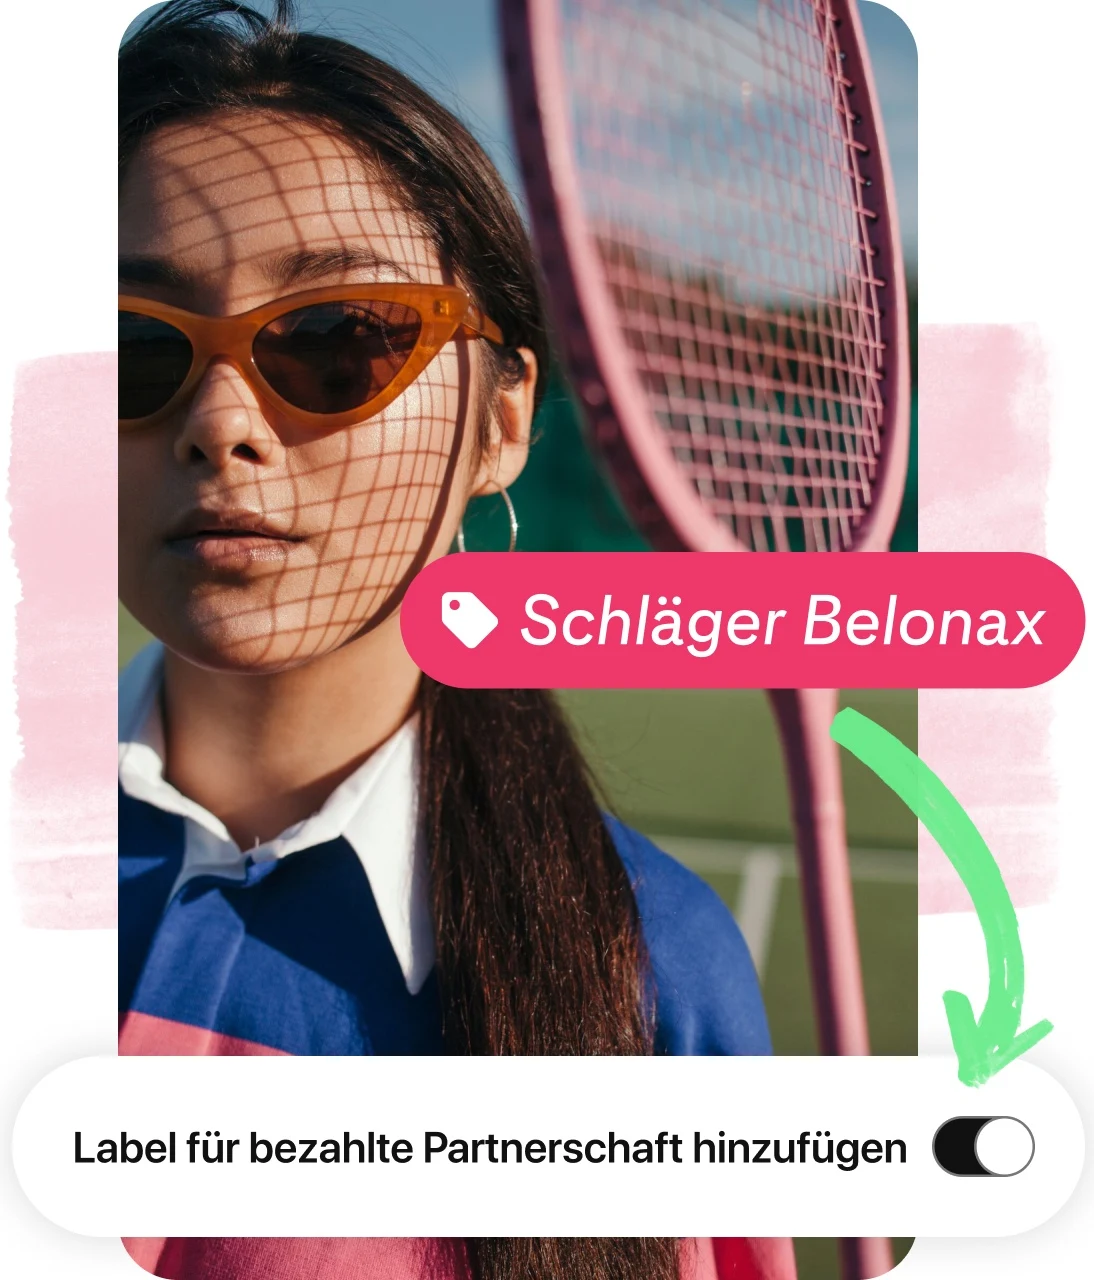 Pin collage, showing woman wearing sunglasses holding a tennis racket, a product tag and button to disclose brand partnership.